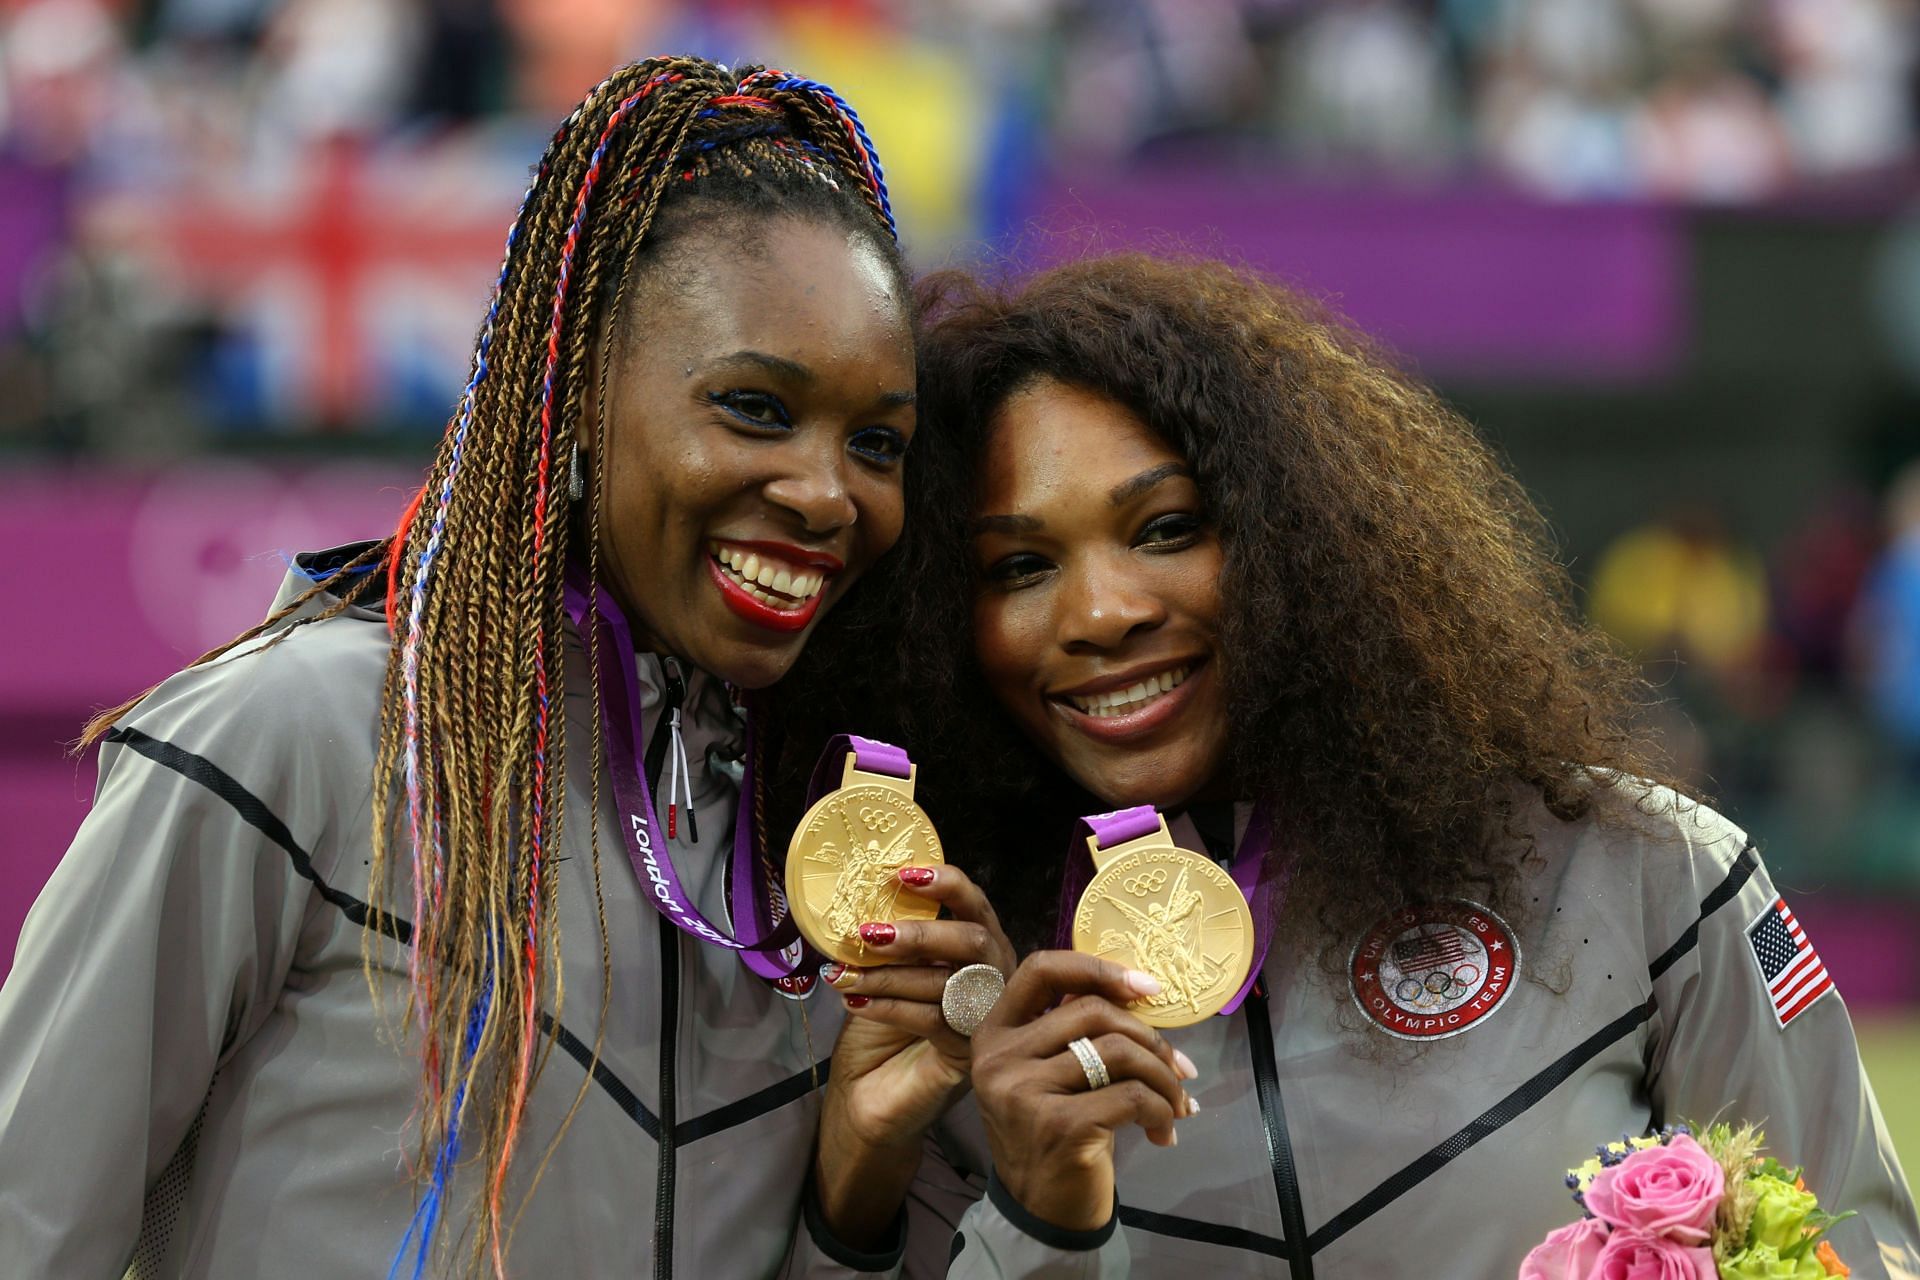 Venus and Serena Williams are a force to be reckoned with on the doubles circuit as well